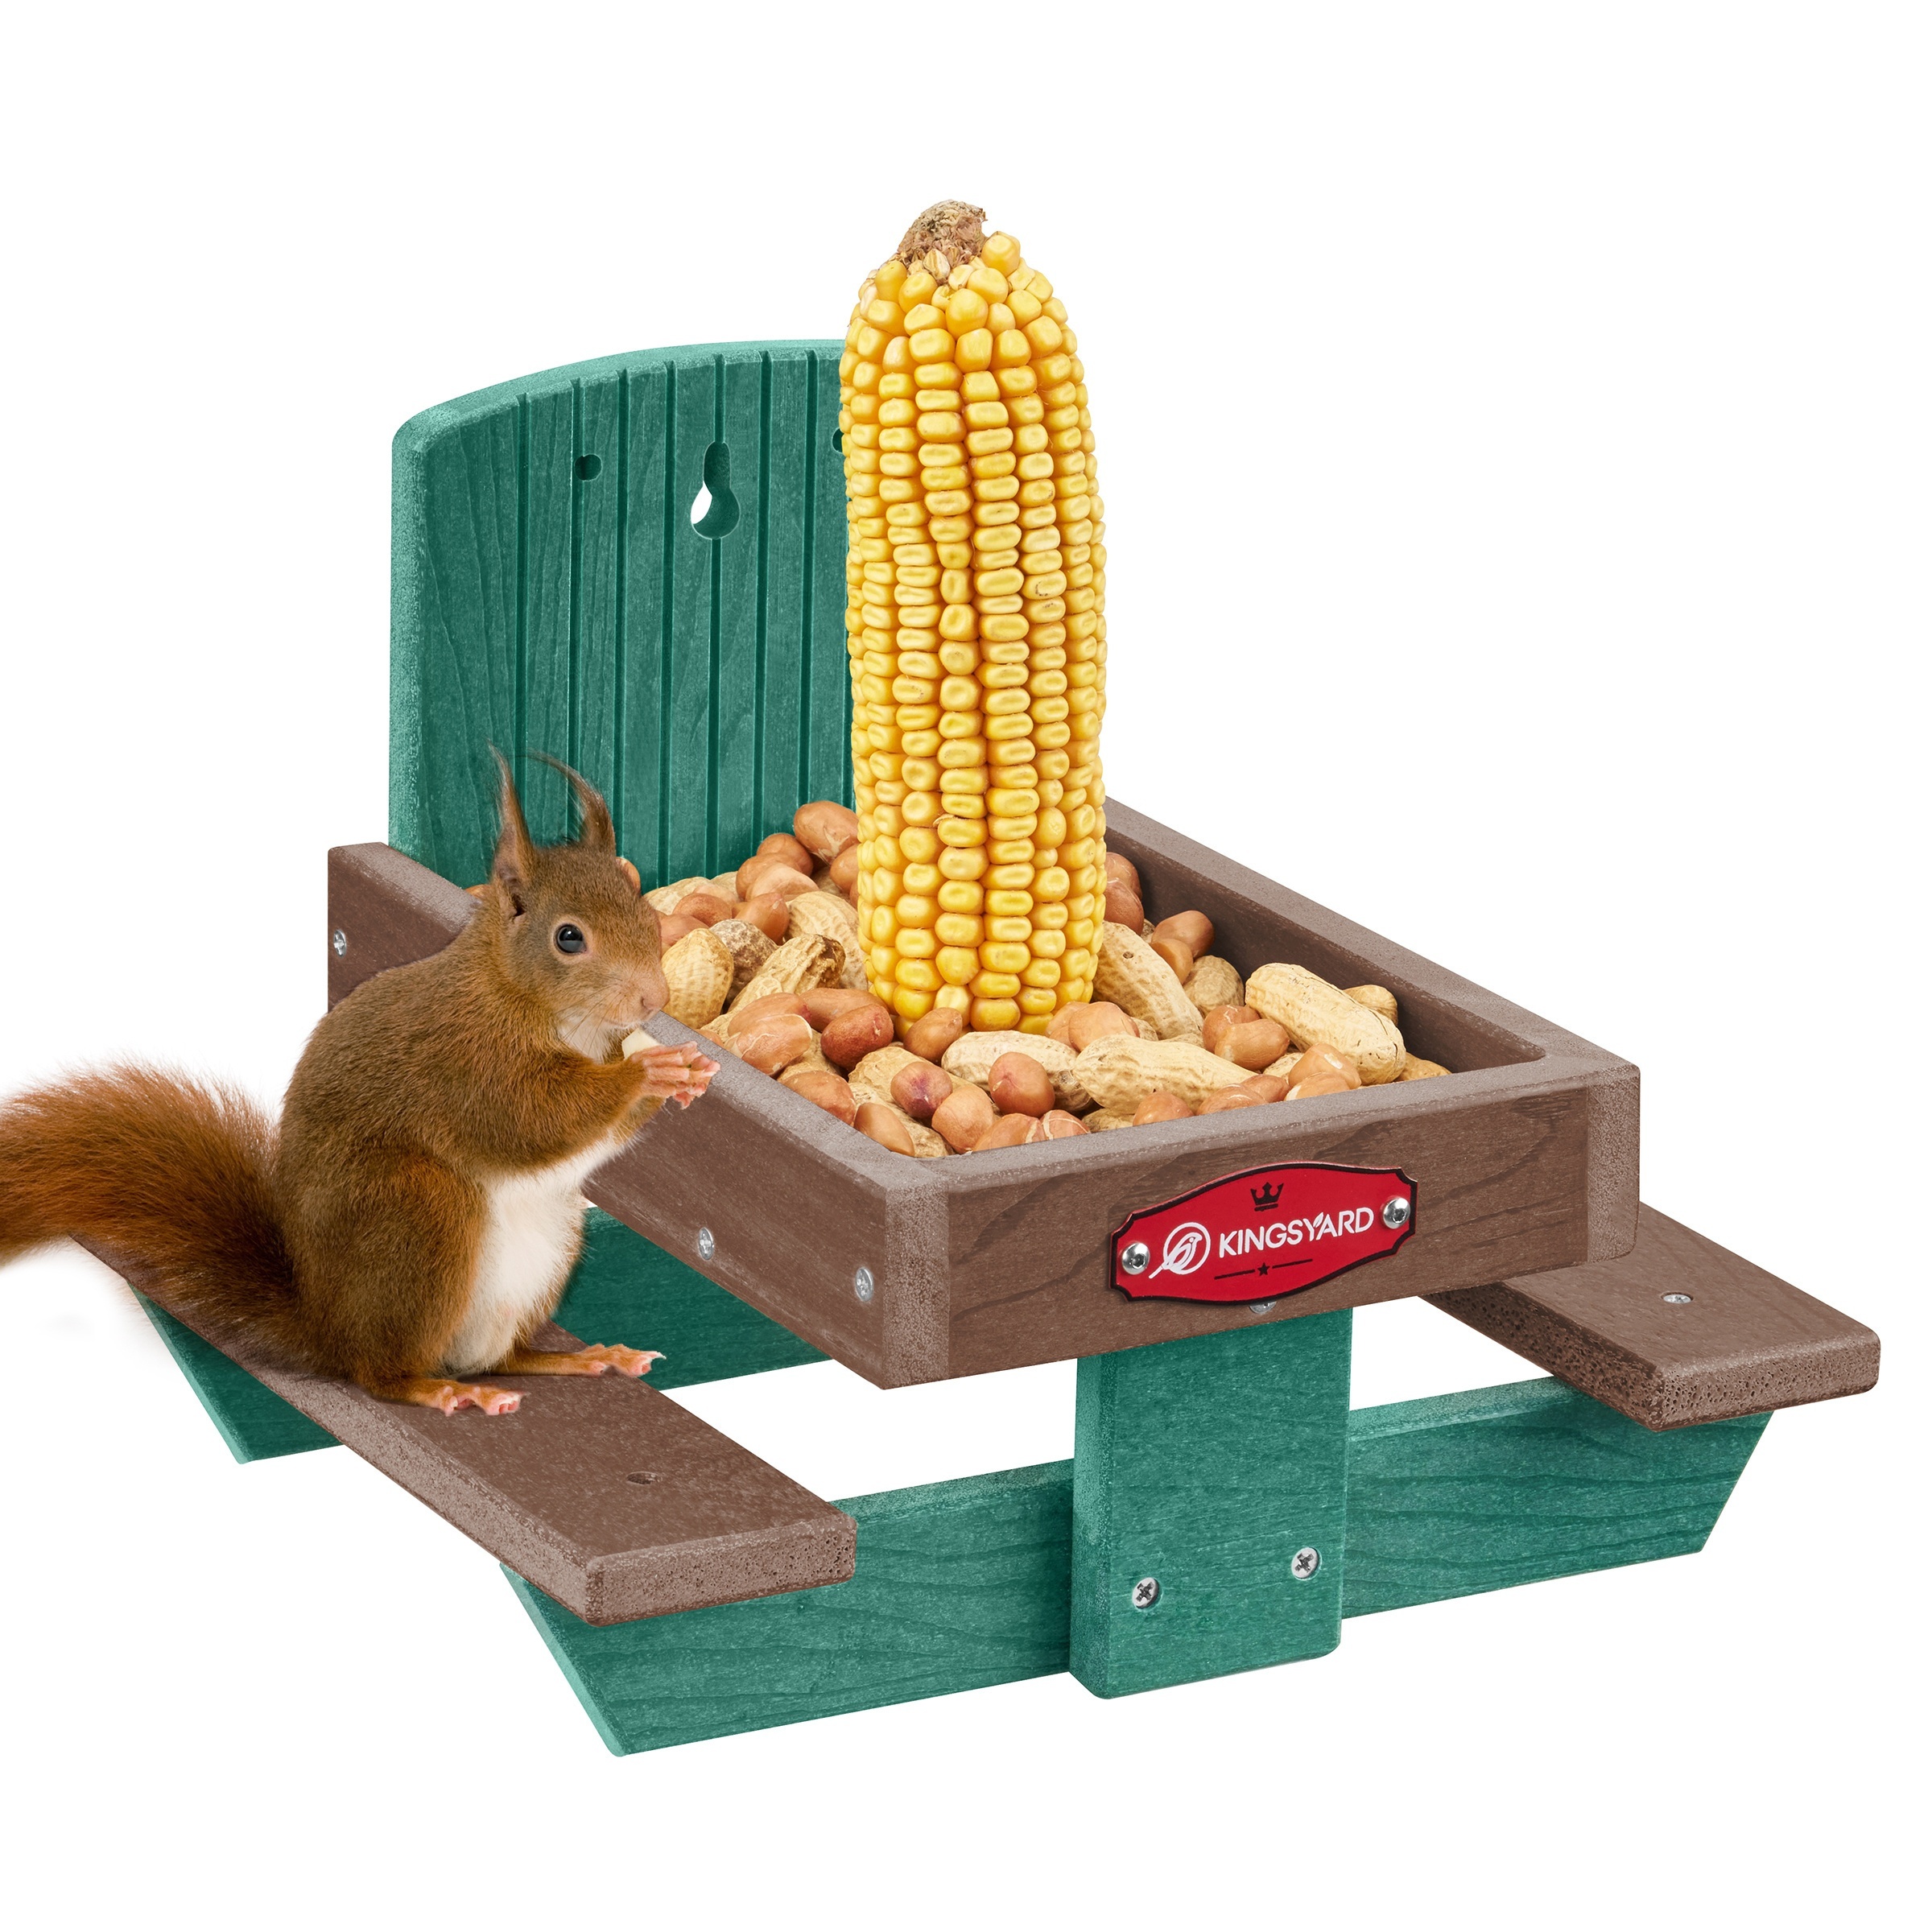 

Kingsyard Squirrel Feeder Table For Outside, Recycled Plastic Squirrel & Chipmunk Picnic Table Feeder With Corn Cob Holder, 2 X Solid Structure Benches, Easy To Clean